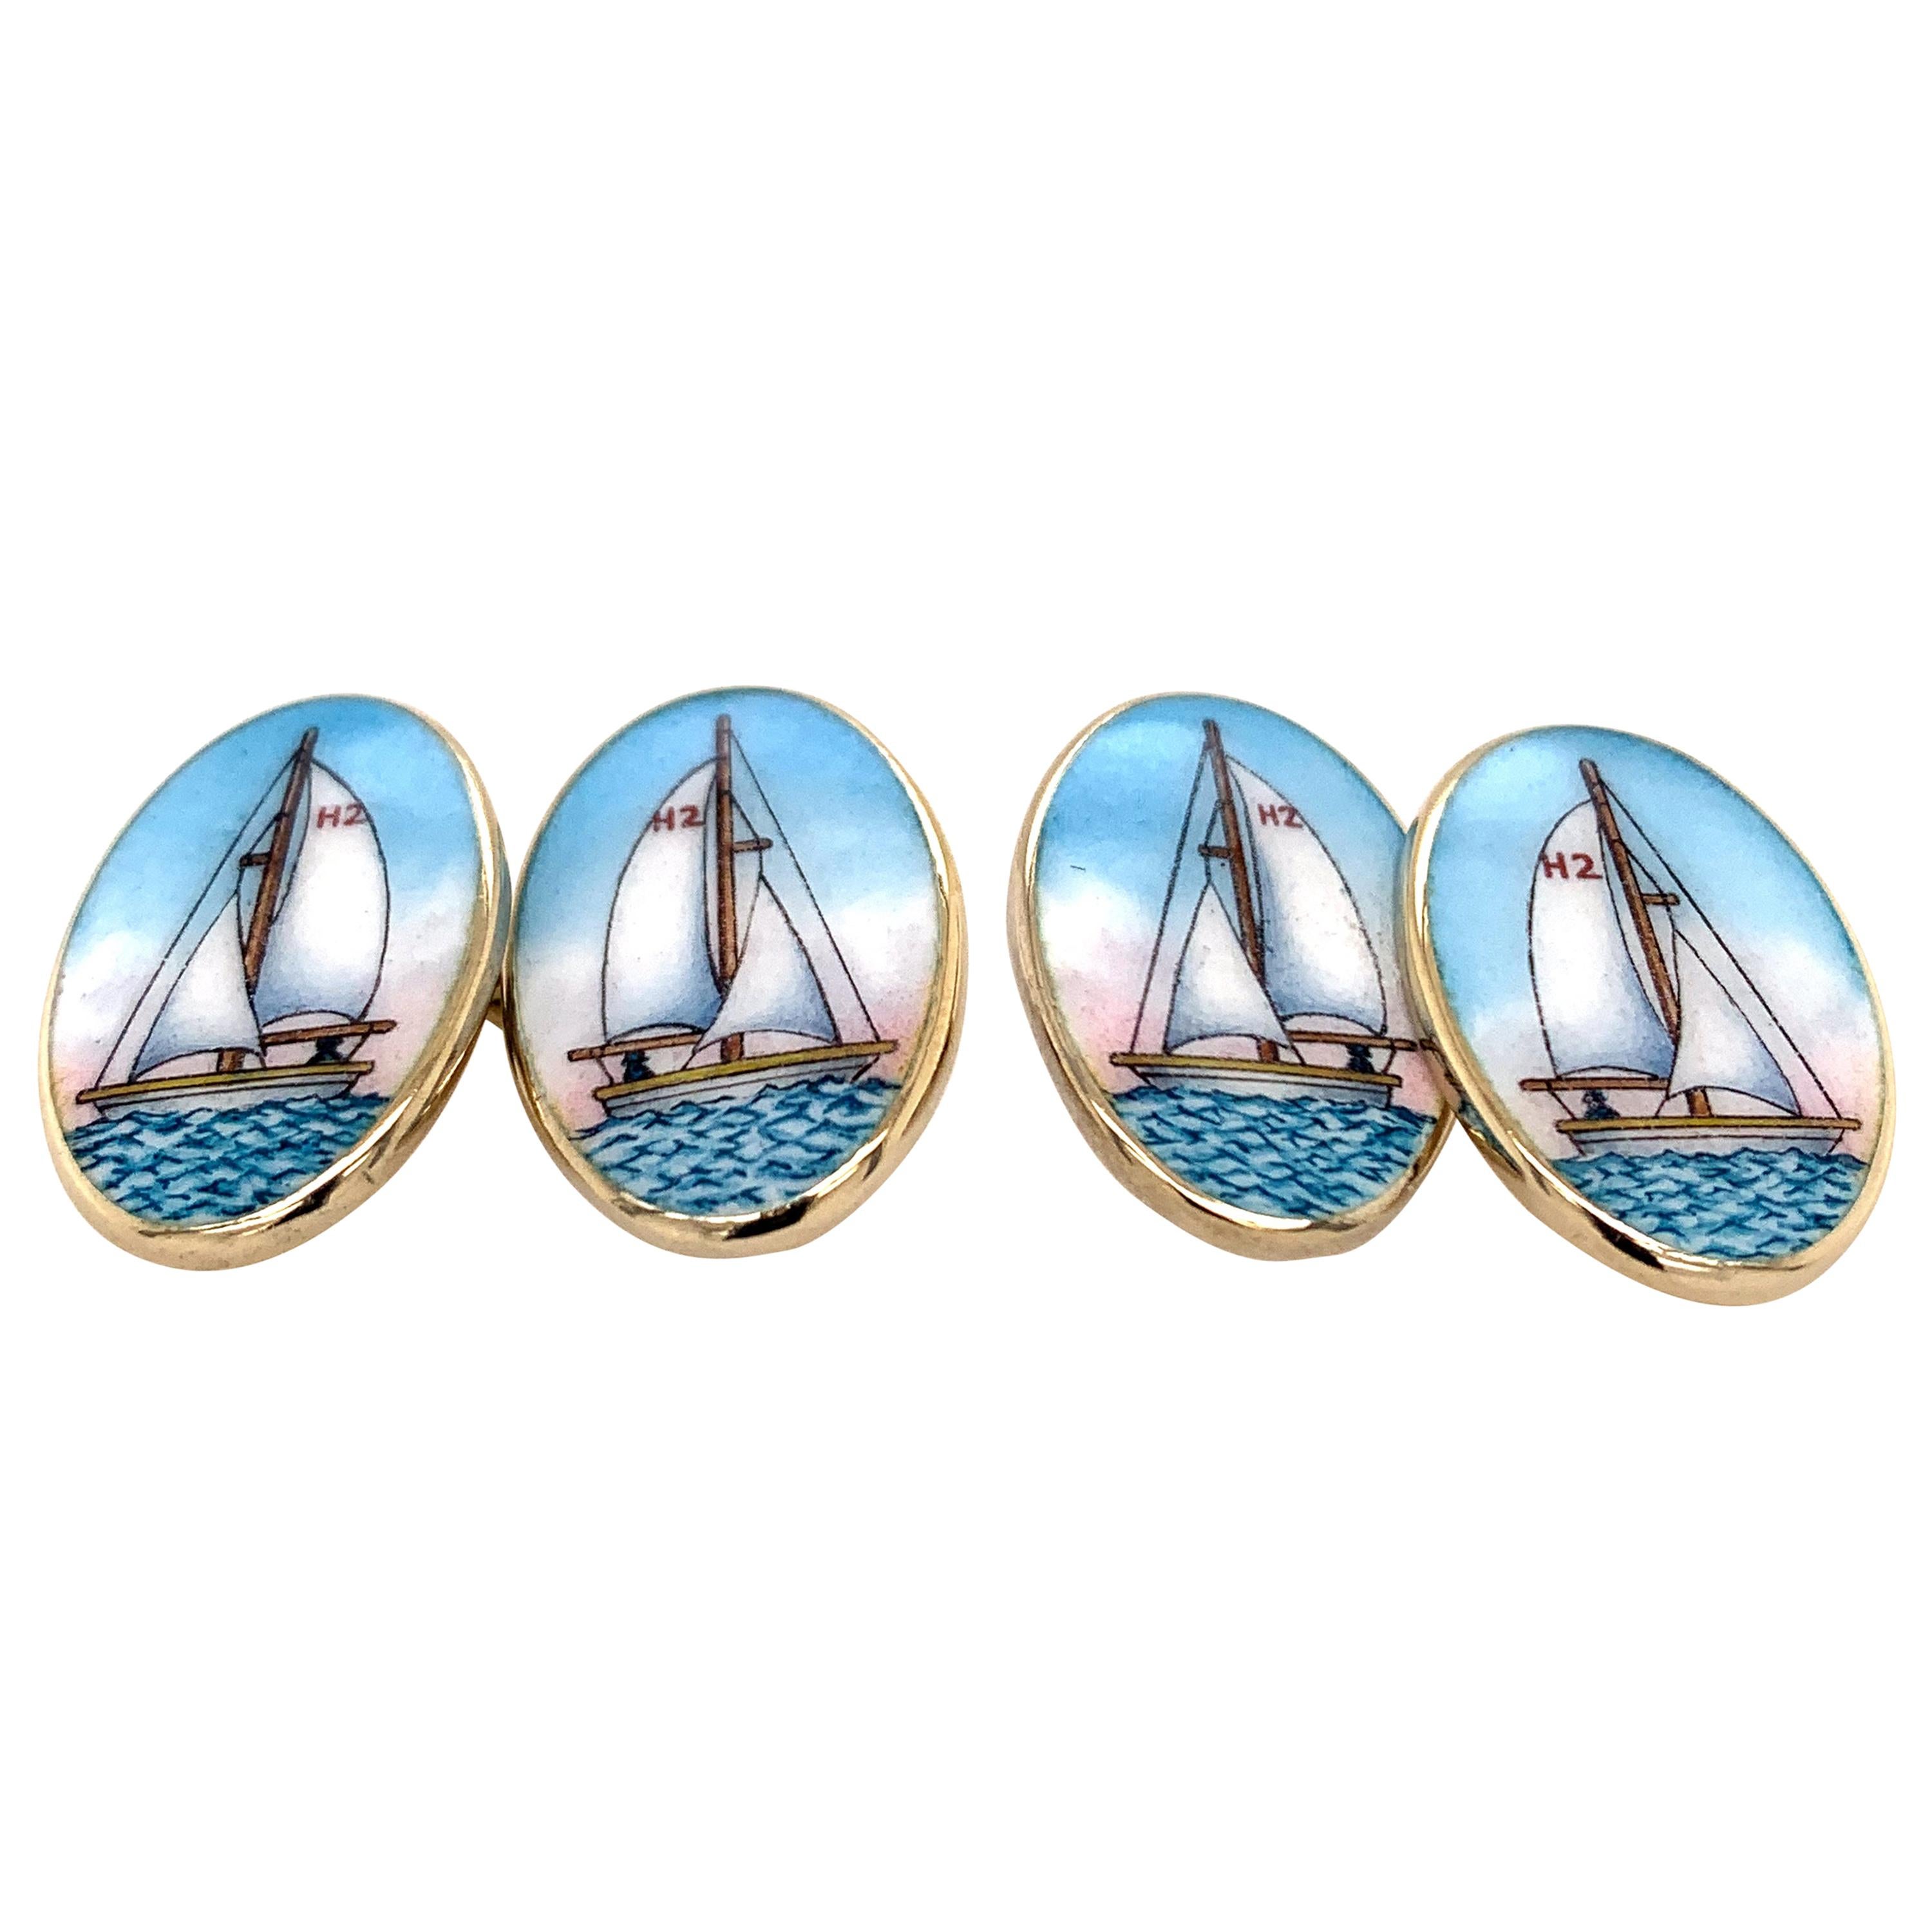 Large Sterling Silver and Enamel Sailboat Cufflinks